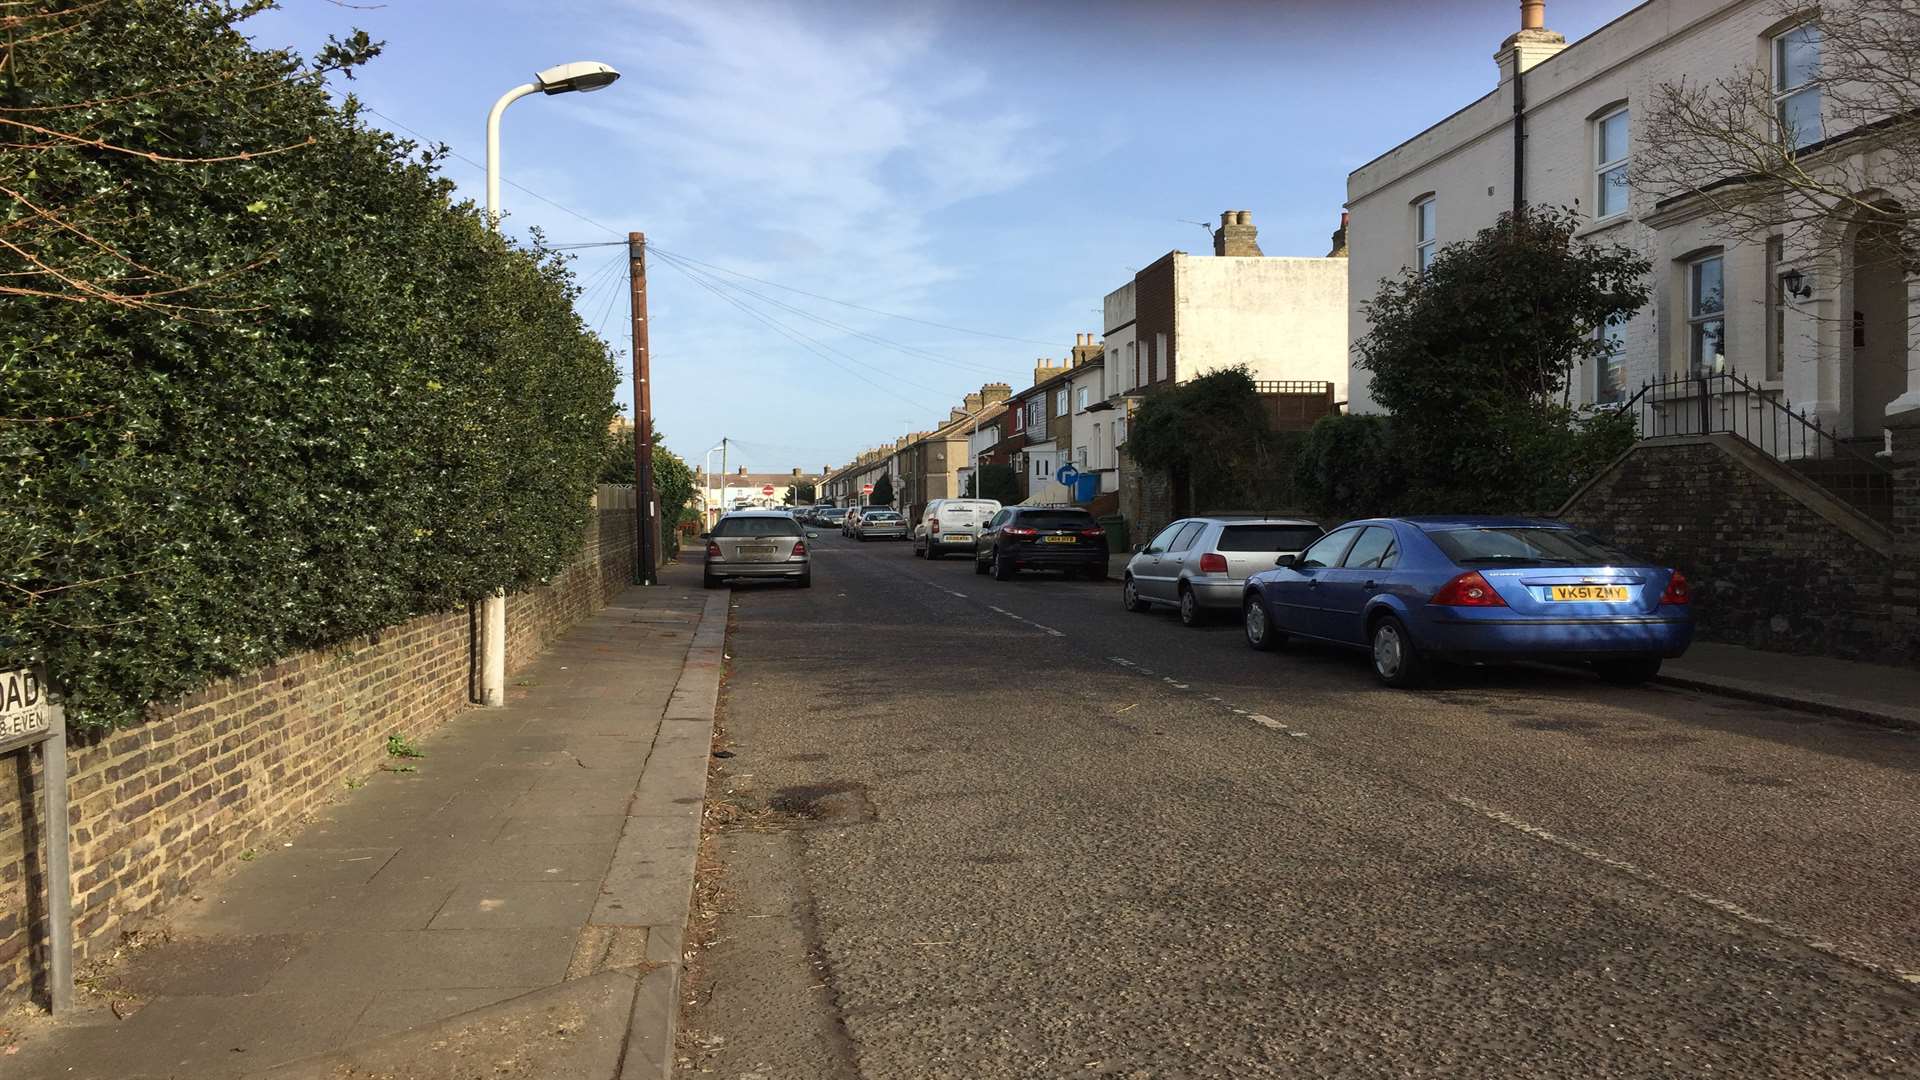 Harold Road where a man was seen lying in the street